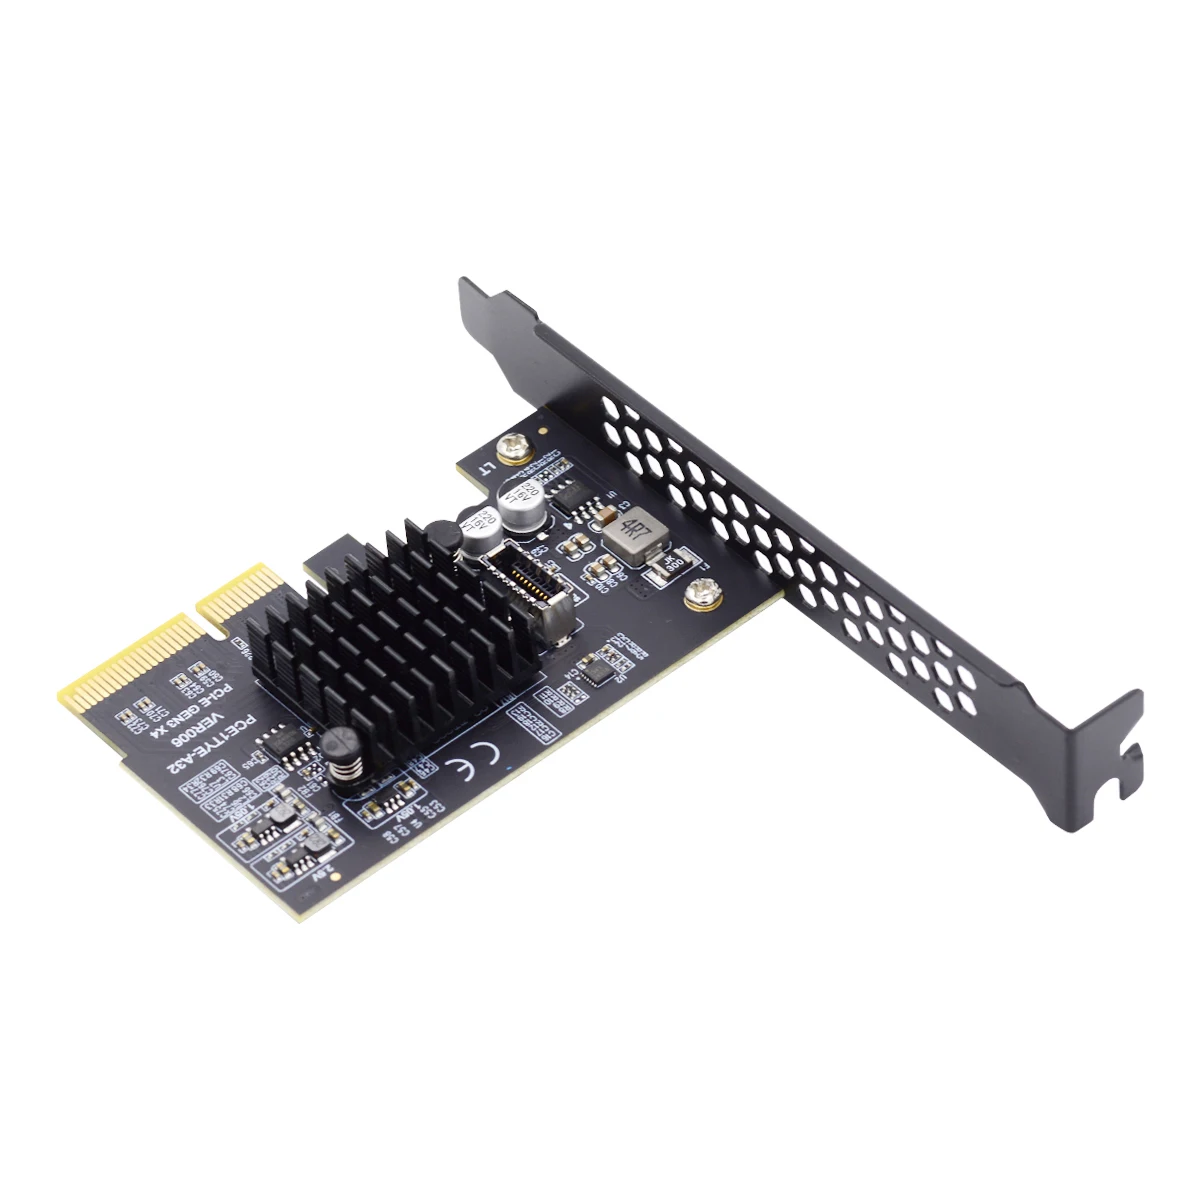 

USB 3.2 Gen2 Type-E 20Gbps Front Panel Socket to PCI-E 4X Express Card Adapter for Desktop Motherboard